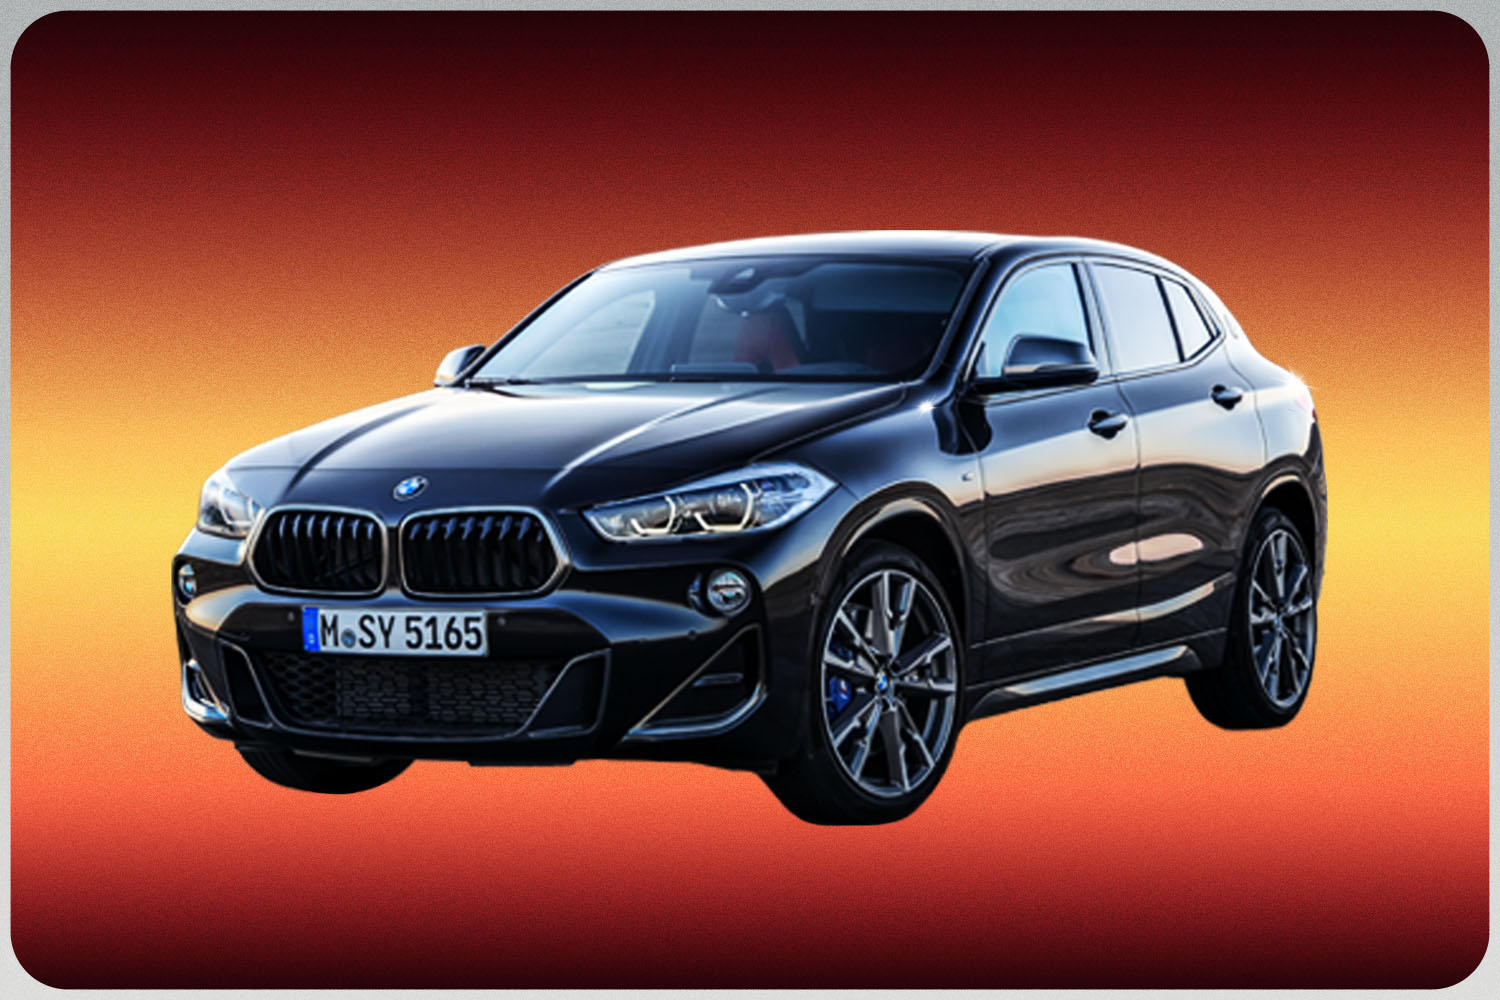 Our Pick for the Best Luxury SUV That's Actually a Hot Hatch in Disguise: 2021 BMW X2 M35i in Black